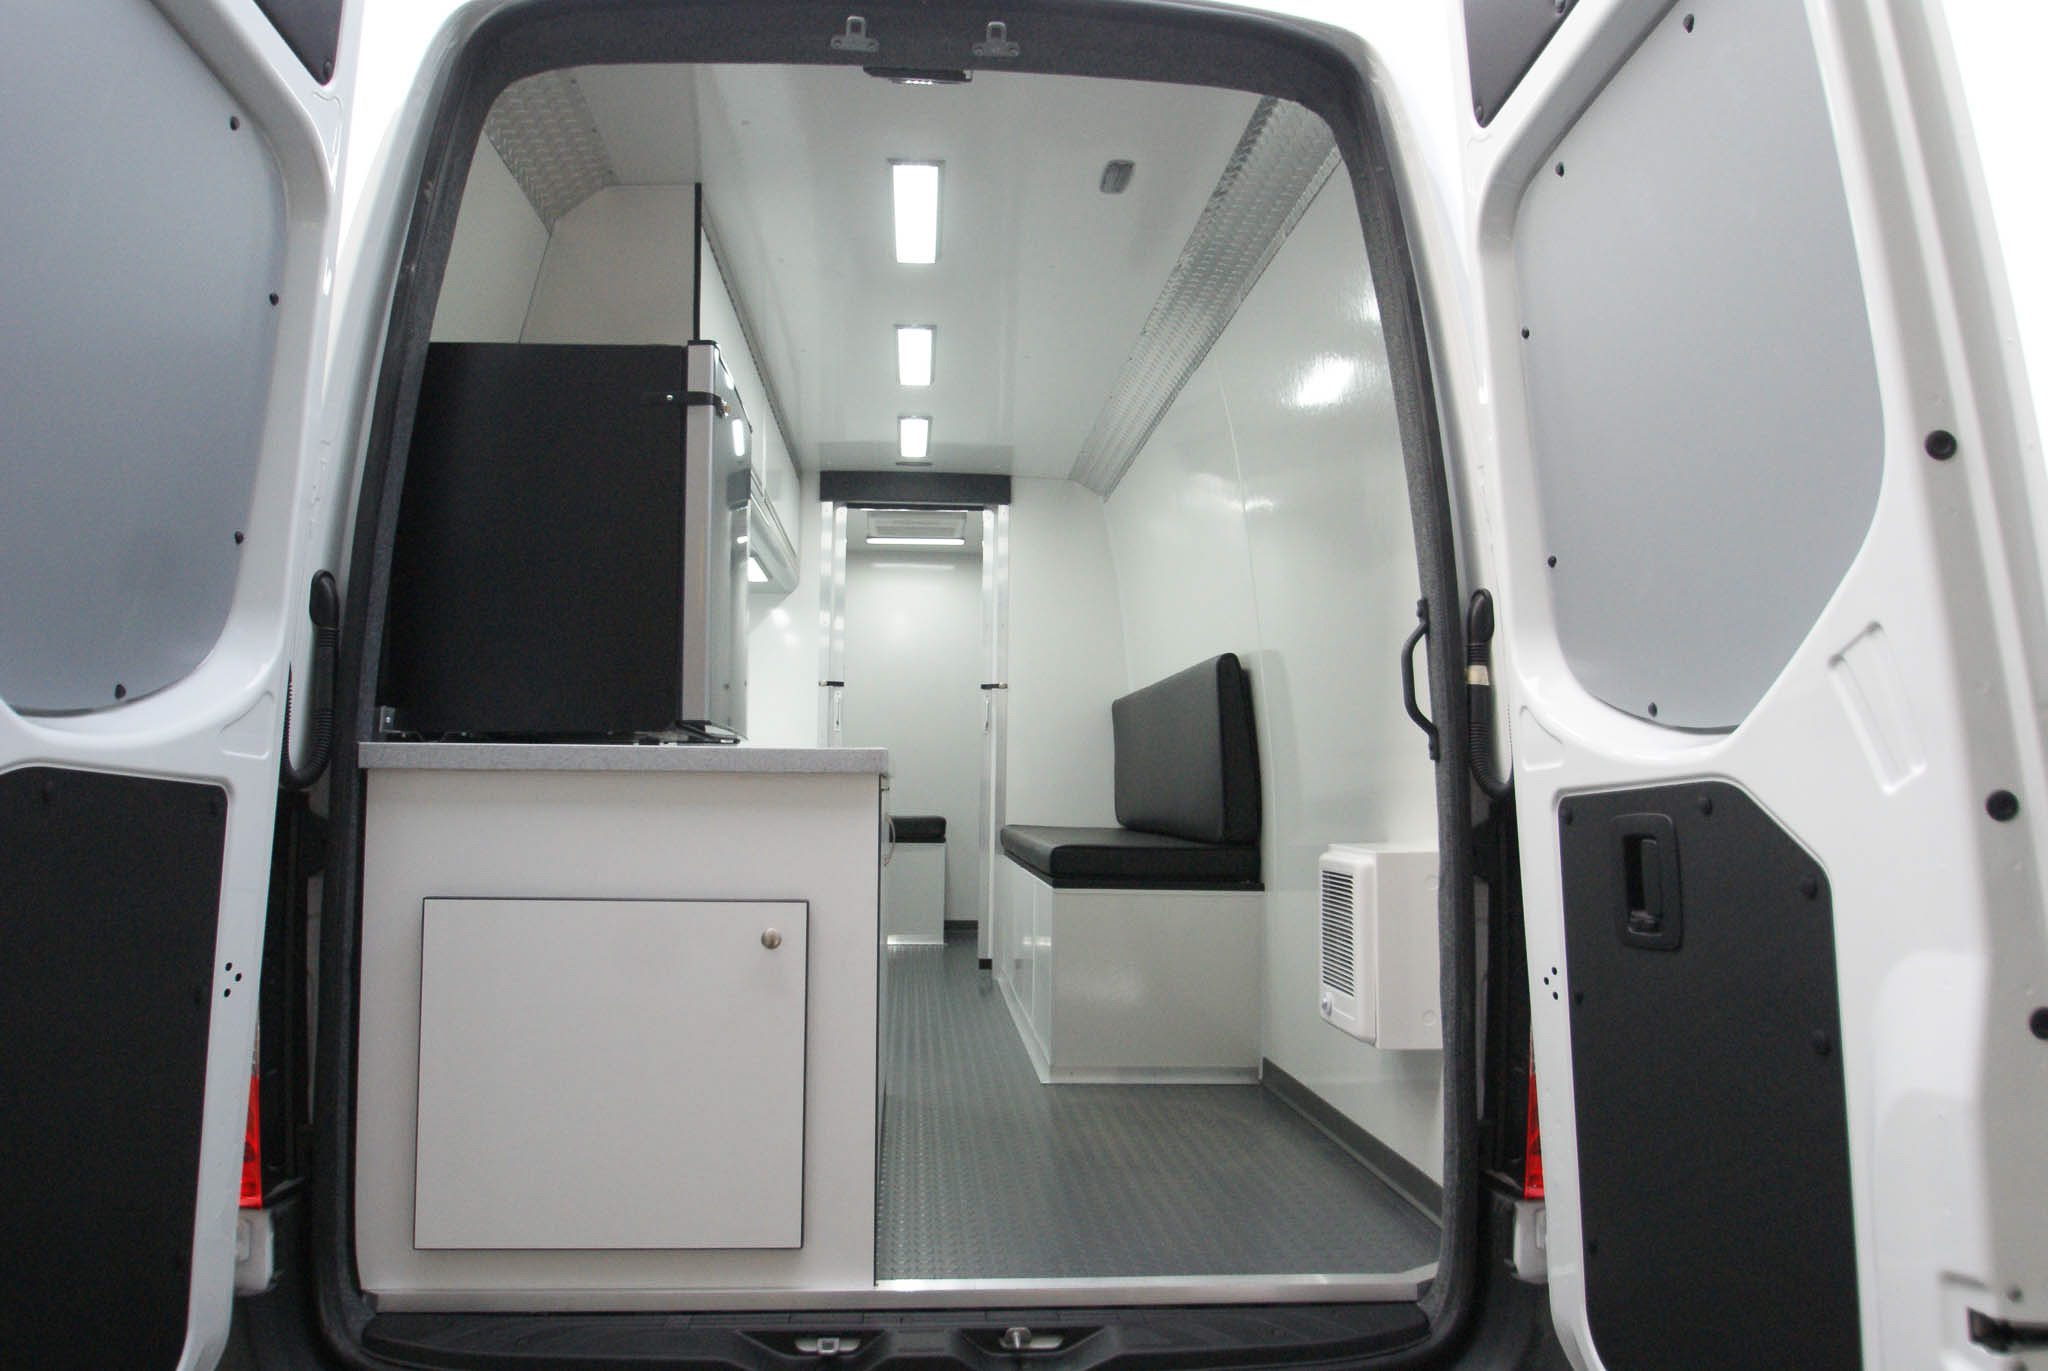 The direct view of the Mobile Outreach sprinter van's back room as viewed from the rear entrance.